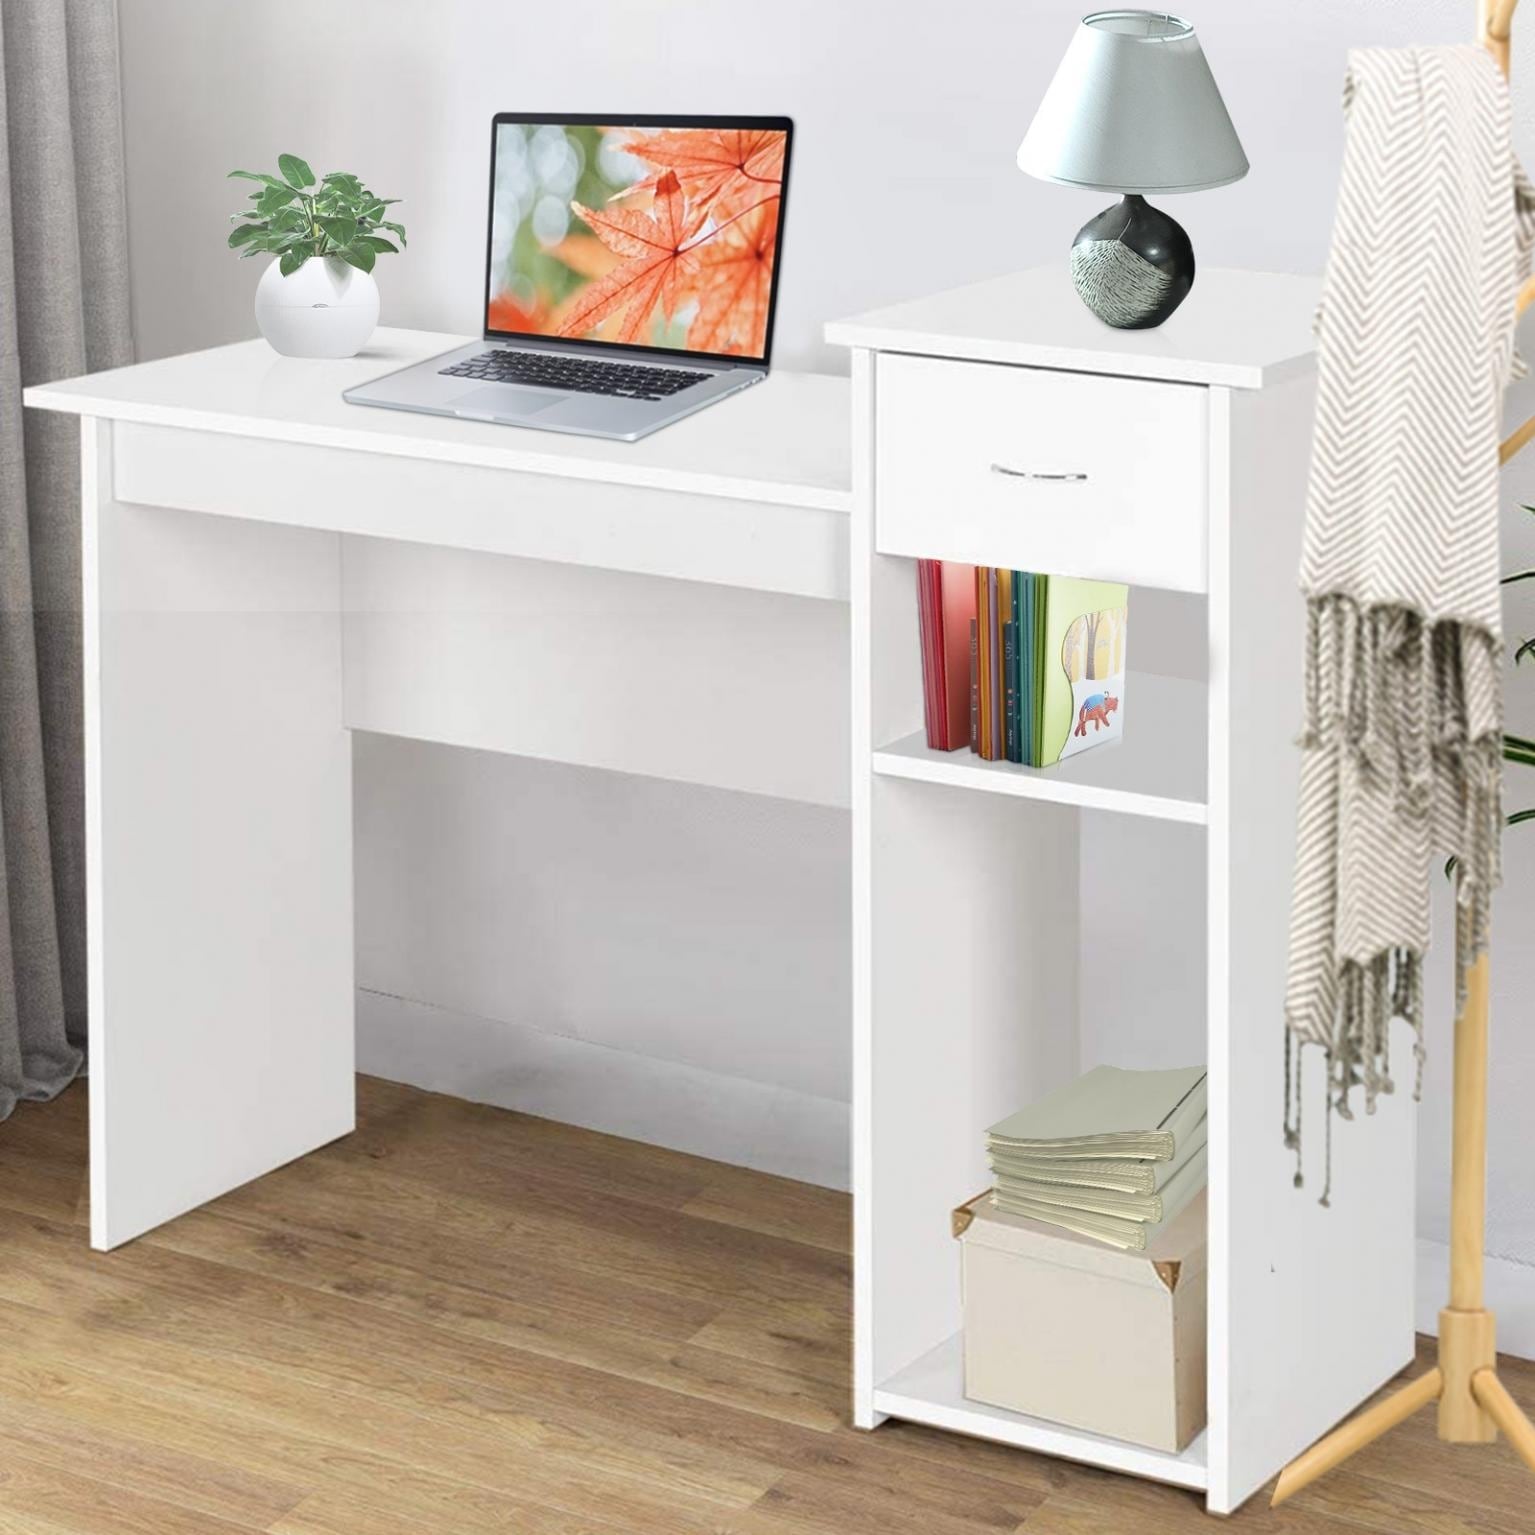 https://ak1.ostkcdn.com/images/products/is/images/direct/e481c8afd809dd0581d45cb5cc933a4da6440c68/Compact-Computer-Desk-With-Drawers-And-Shelves-For-Small-Space-Office-Furniture.jpg